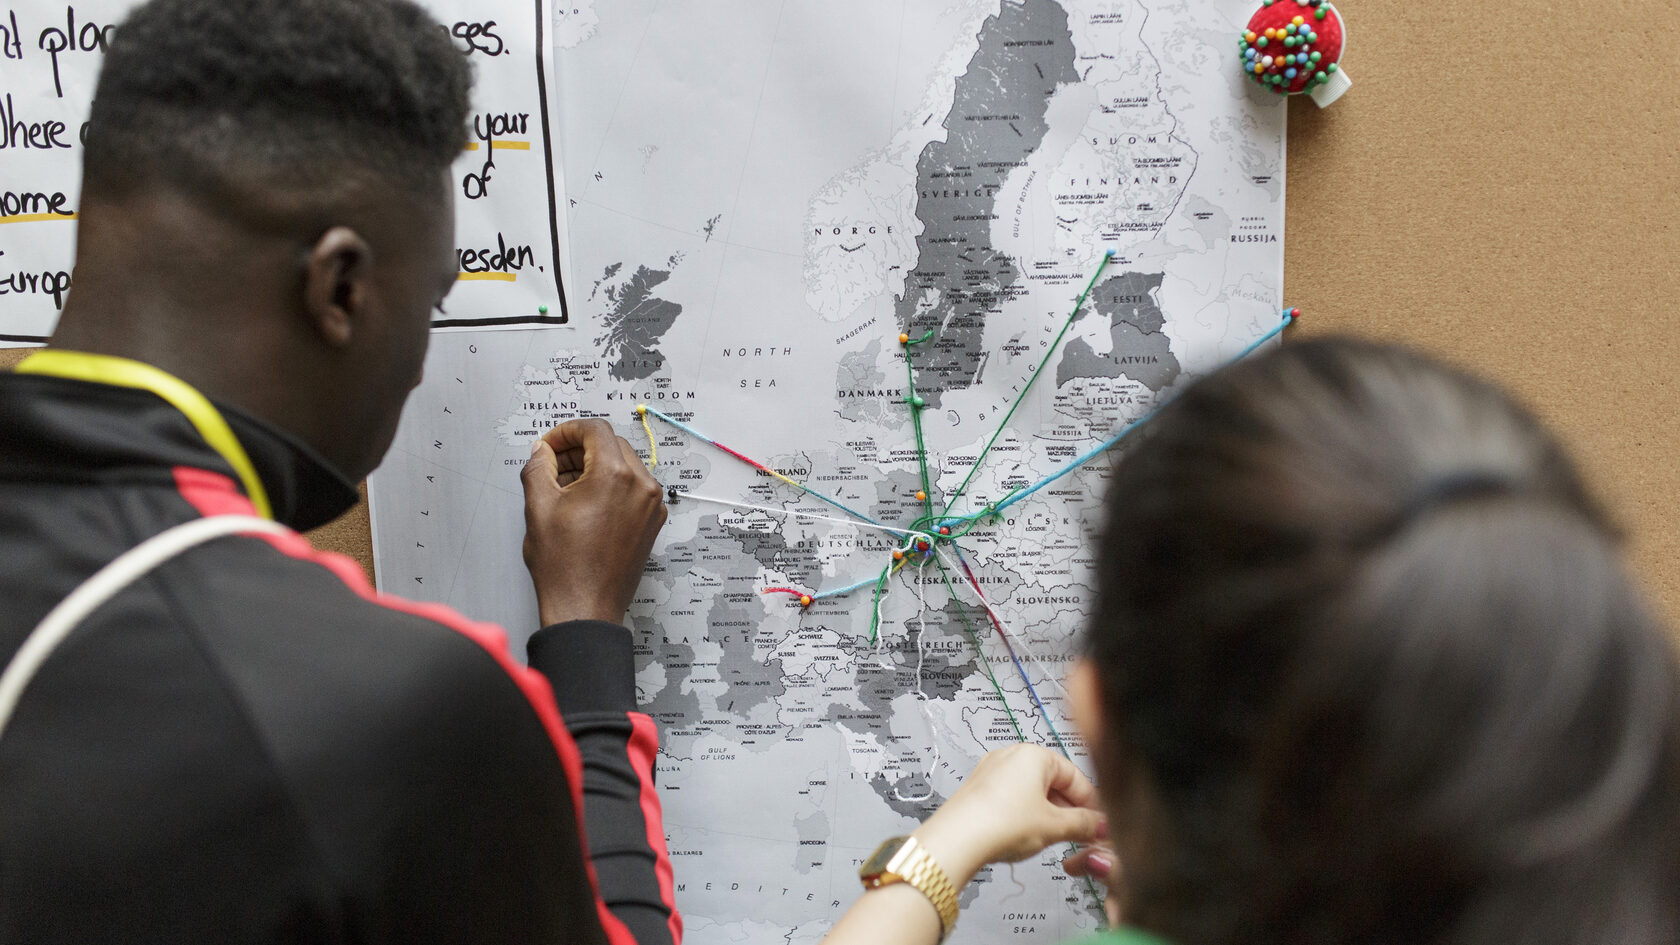 Looking over the shoulder of two young people who are connecting Dresden with other places on a map of Europe using threads of fabric.